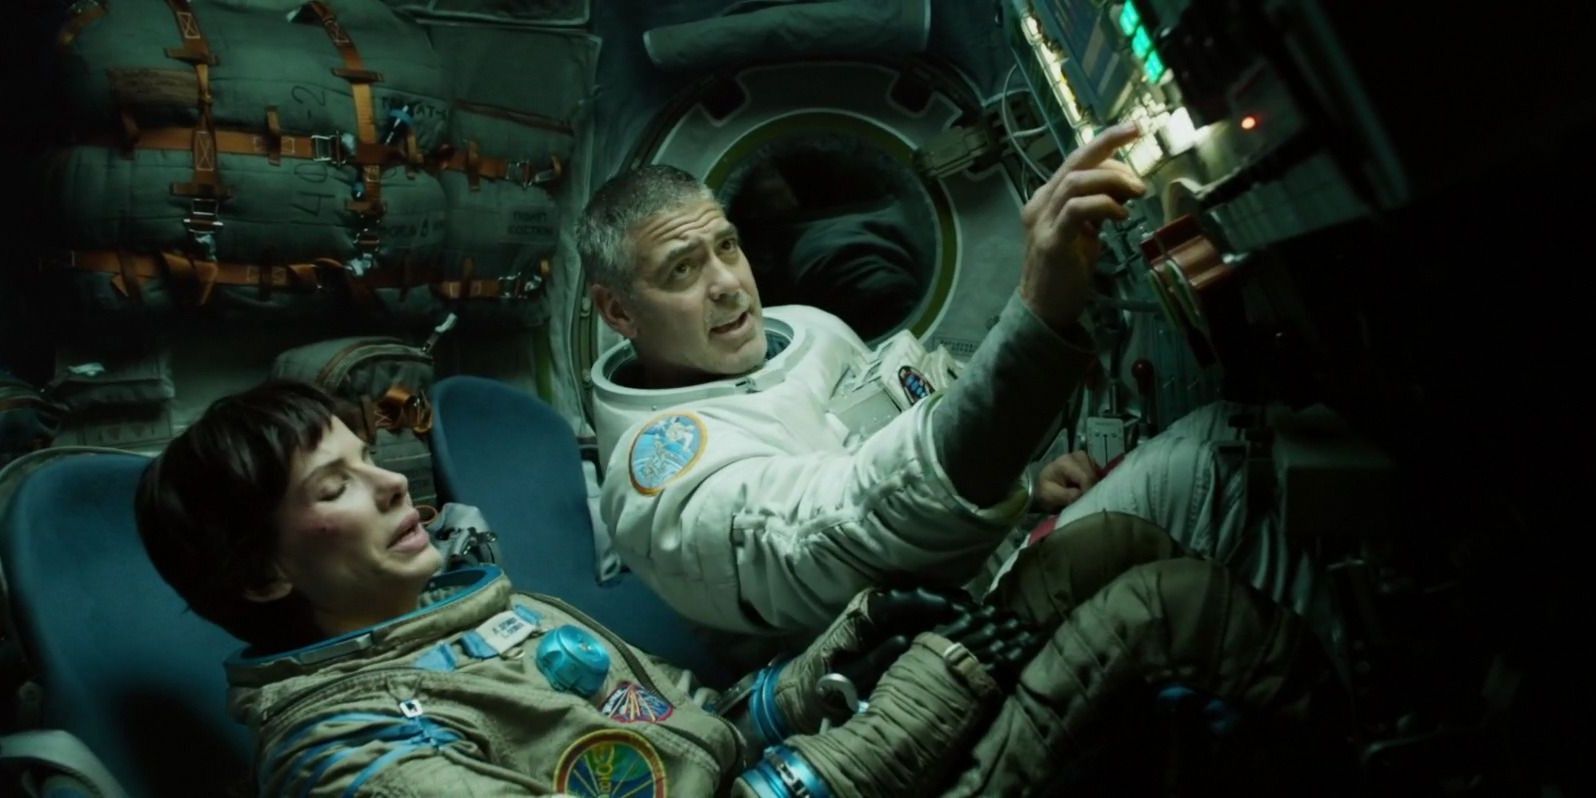 10 Most Visually Stunning SciFi Movies Of The 21st Century So Far